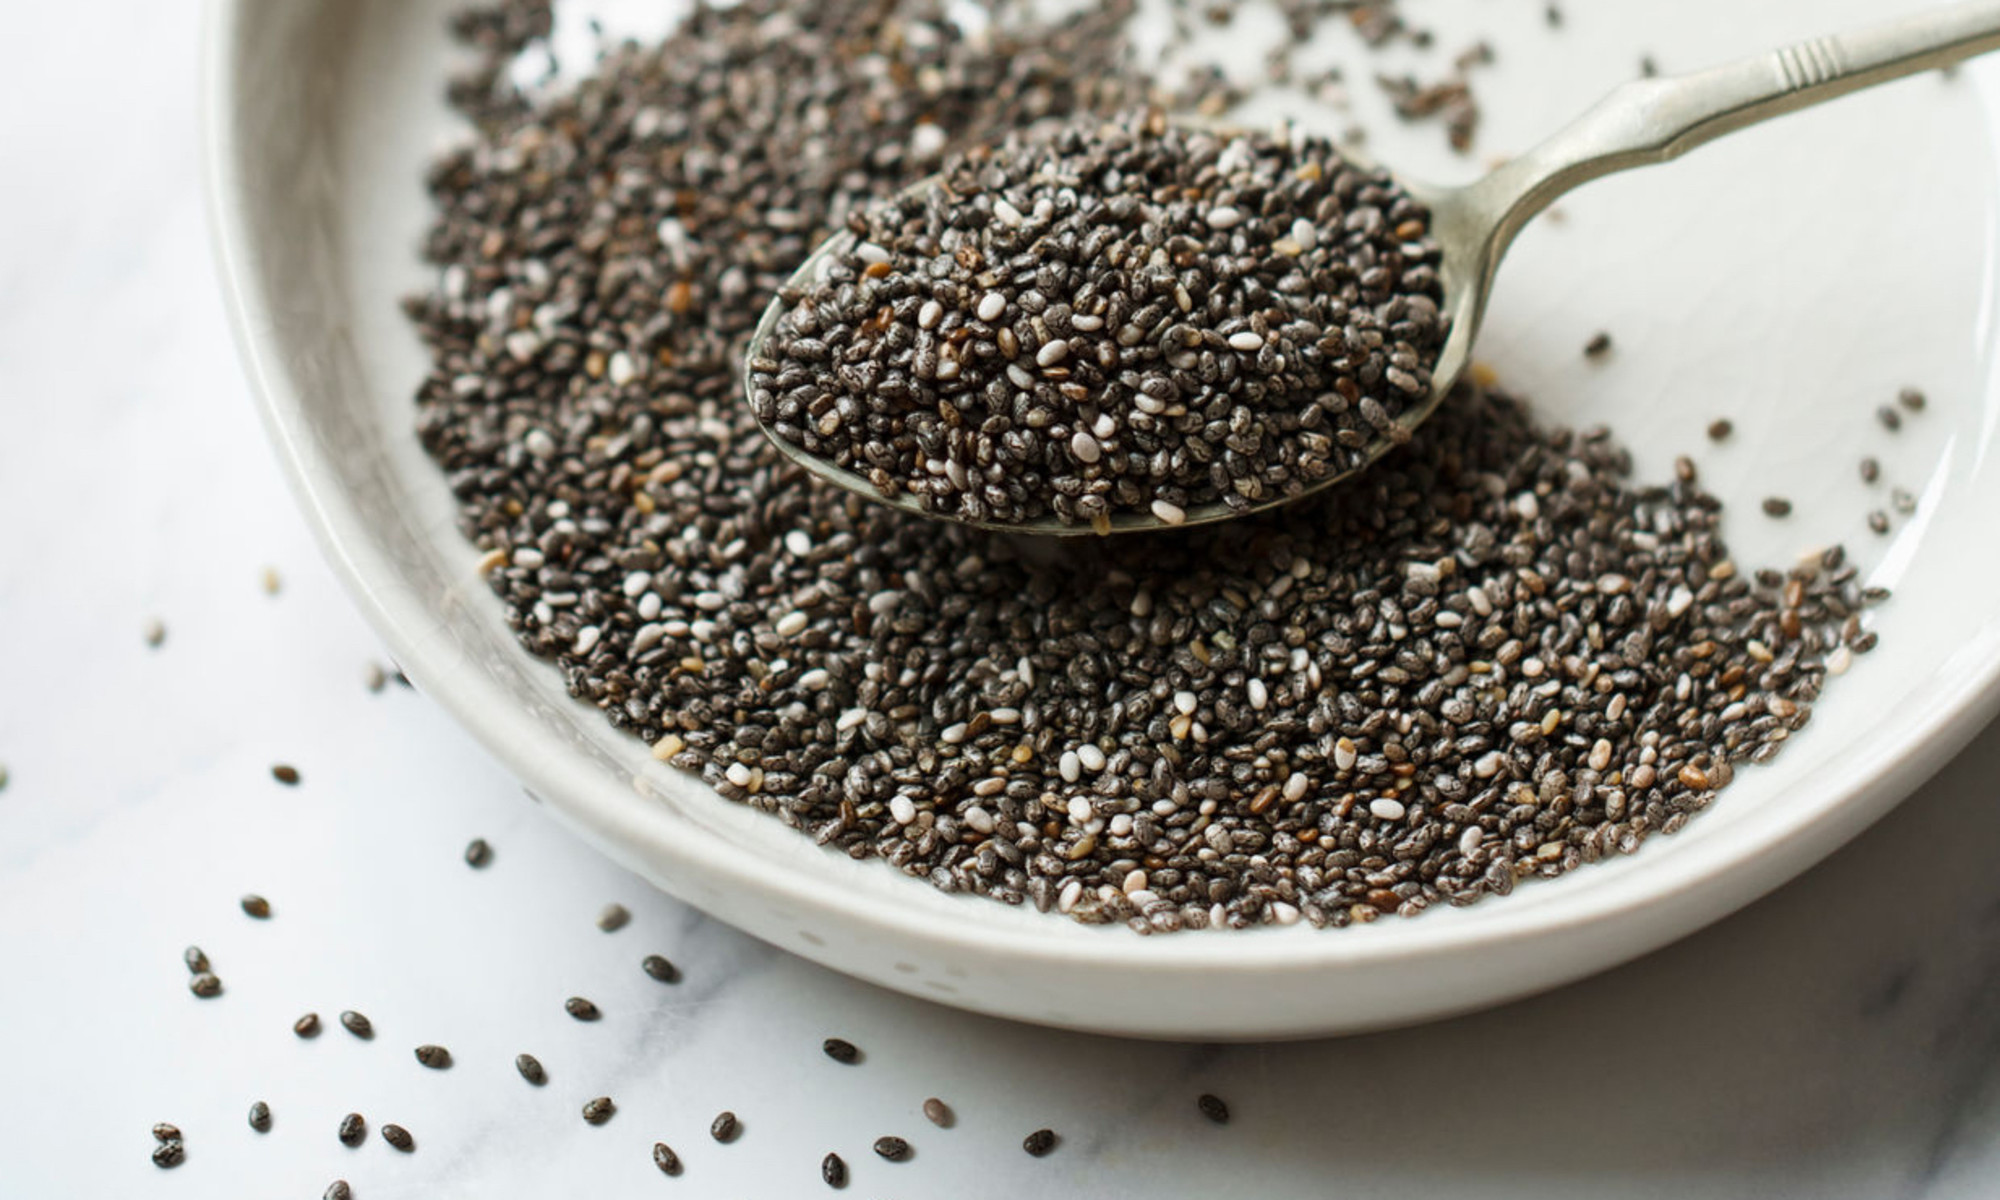 The Top 5 Health Benefits Of Chia Seeds: Digestion, Heart Health, & More